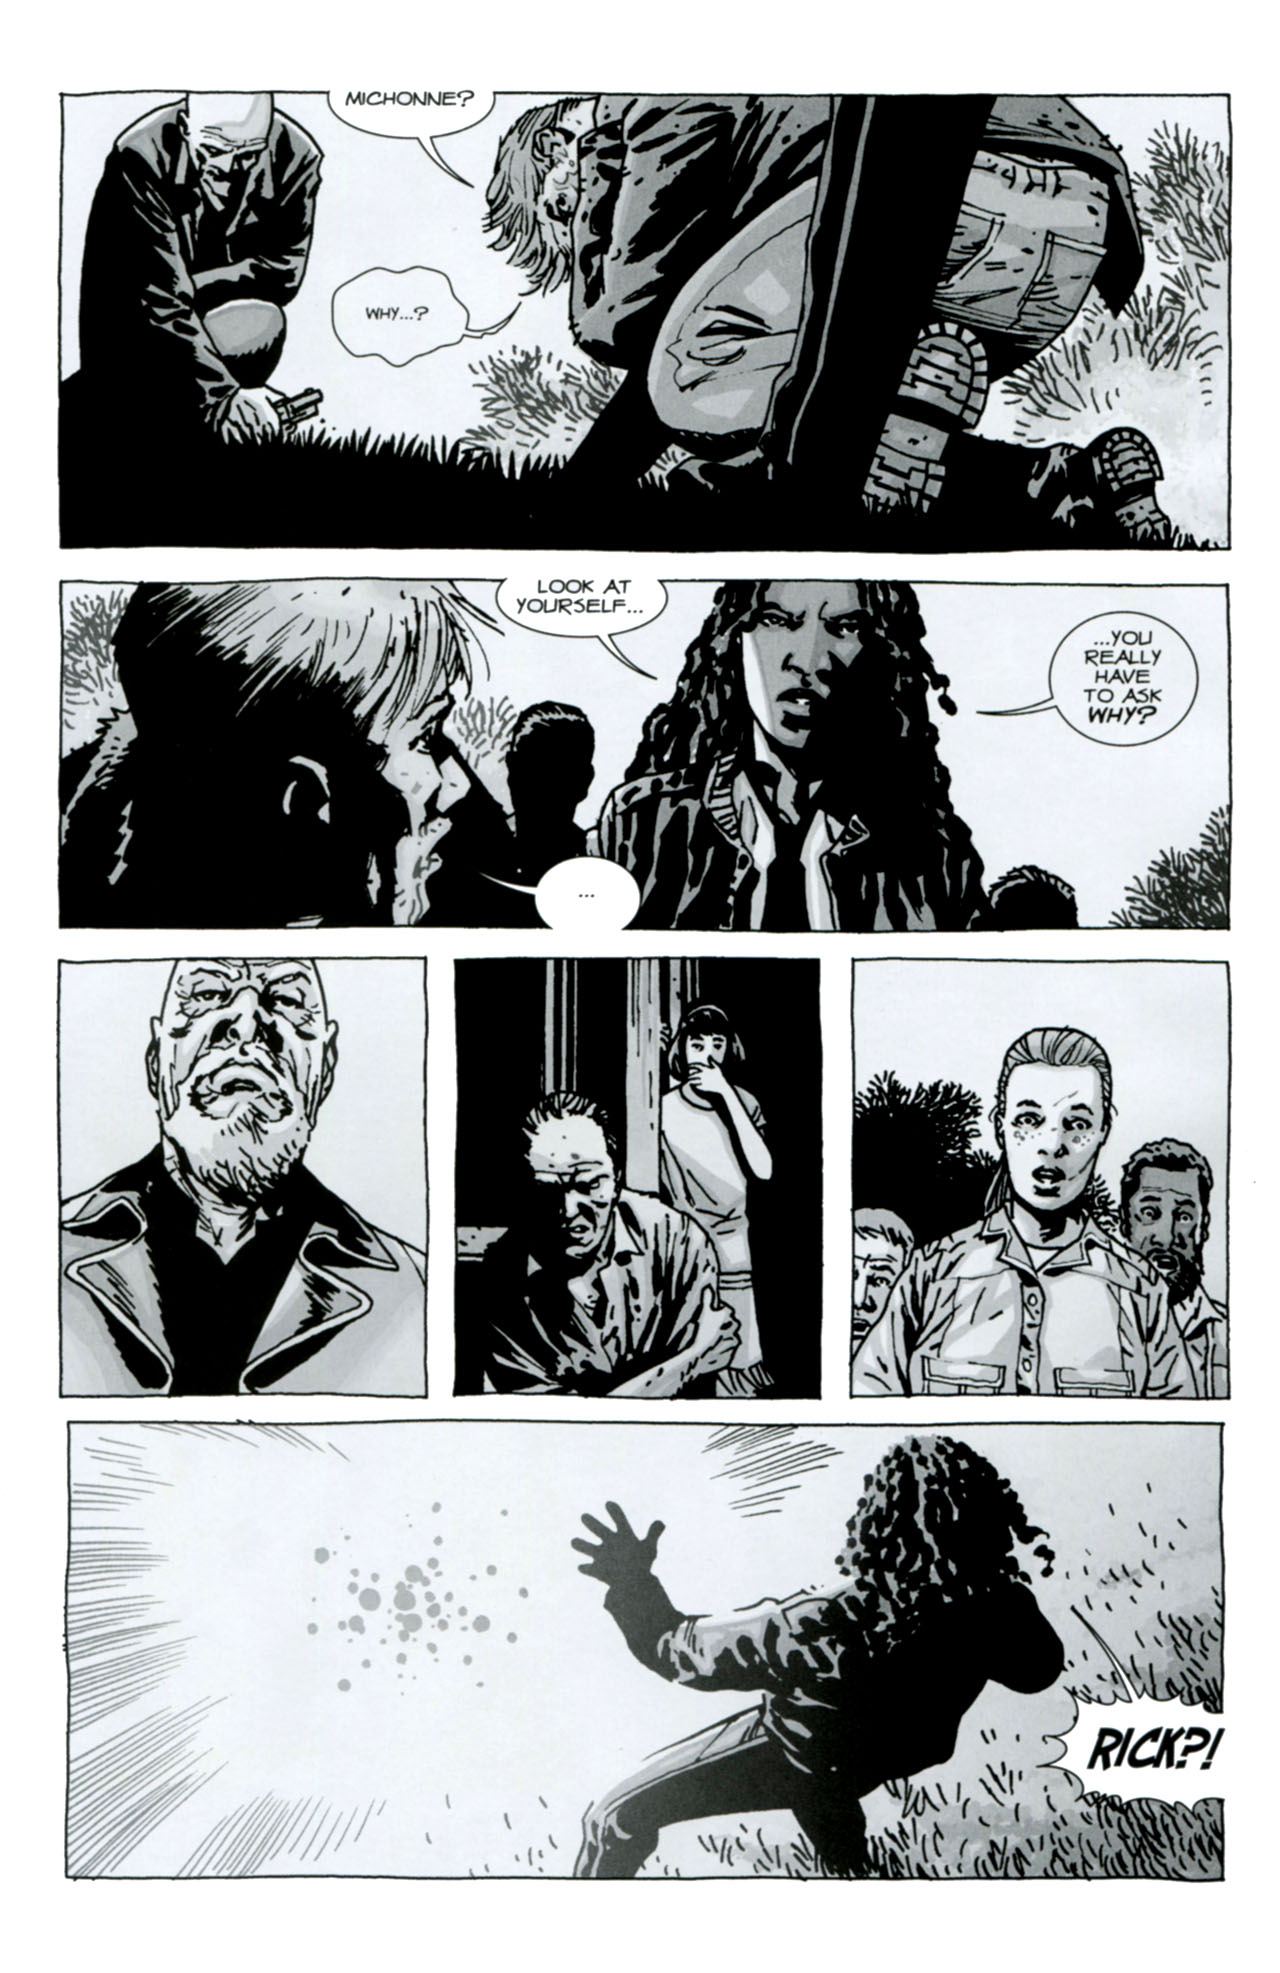 walking dead comic ending - Michonne? Why...? Look At Yourself... ...You Really Have To Ask Why? " Hilary Rick?!